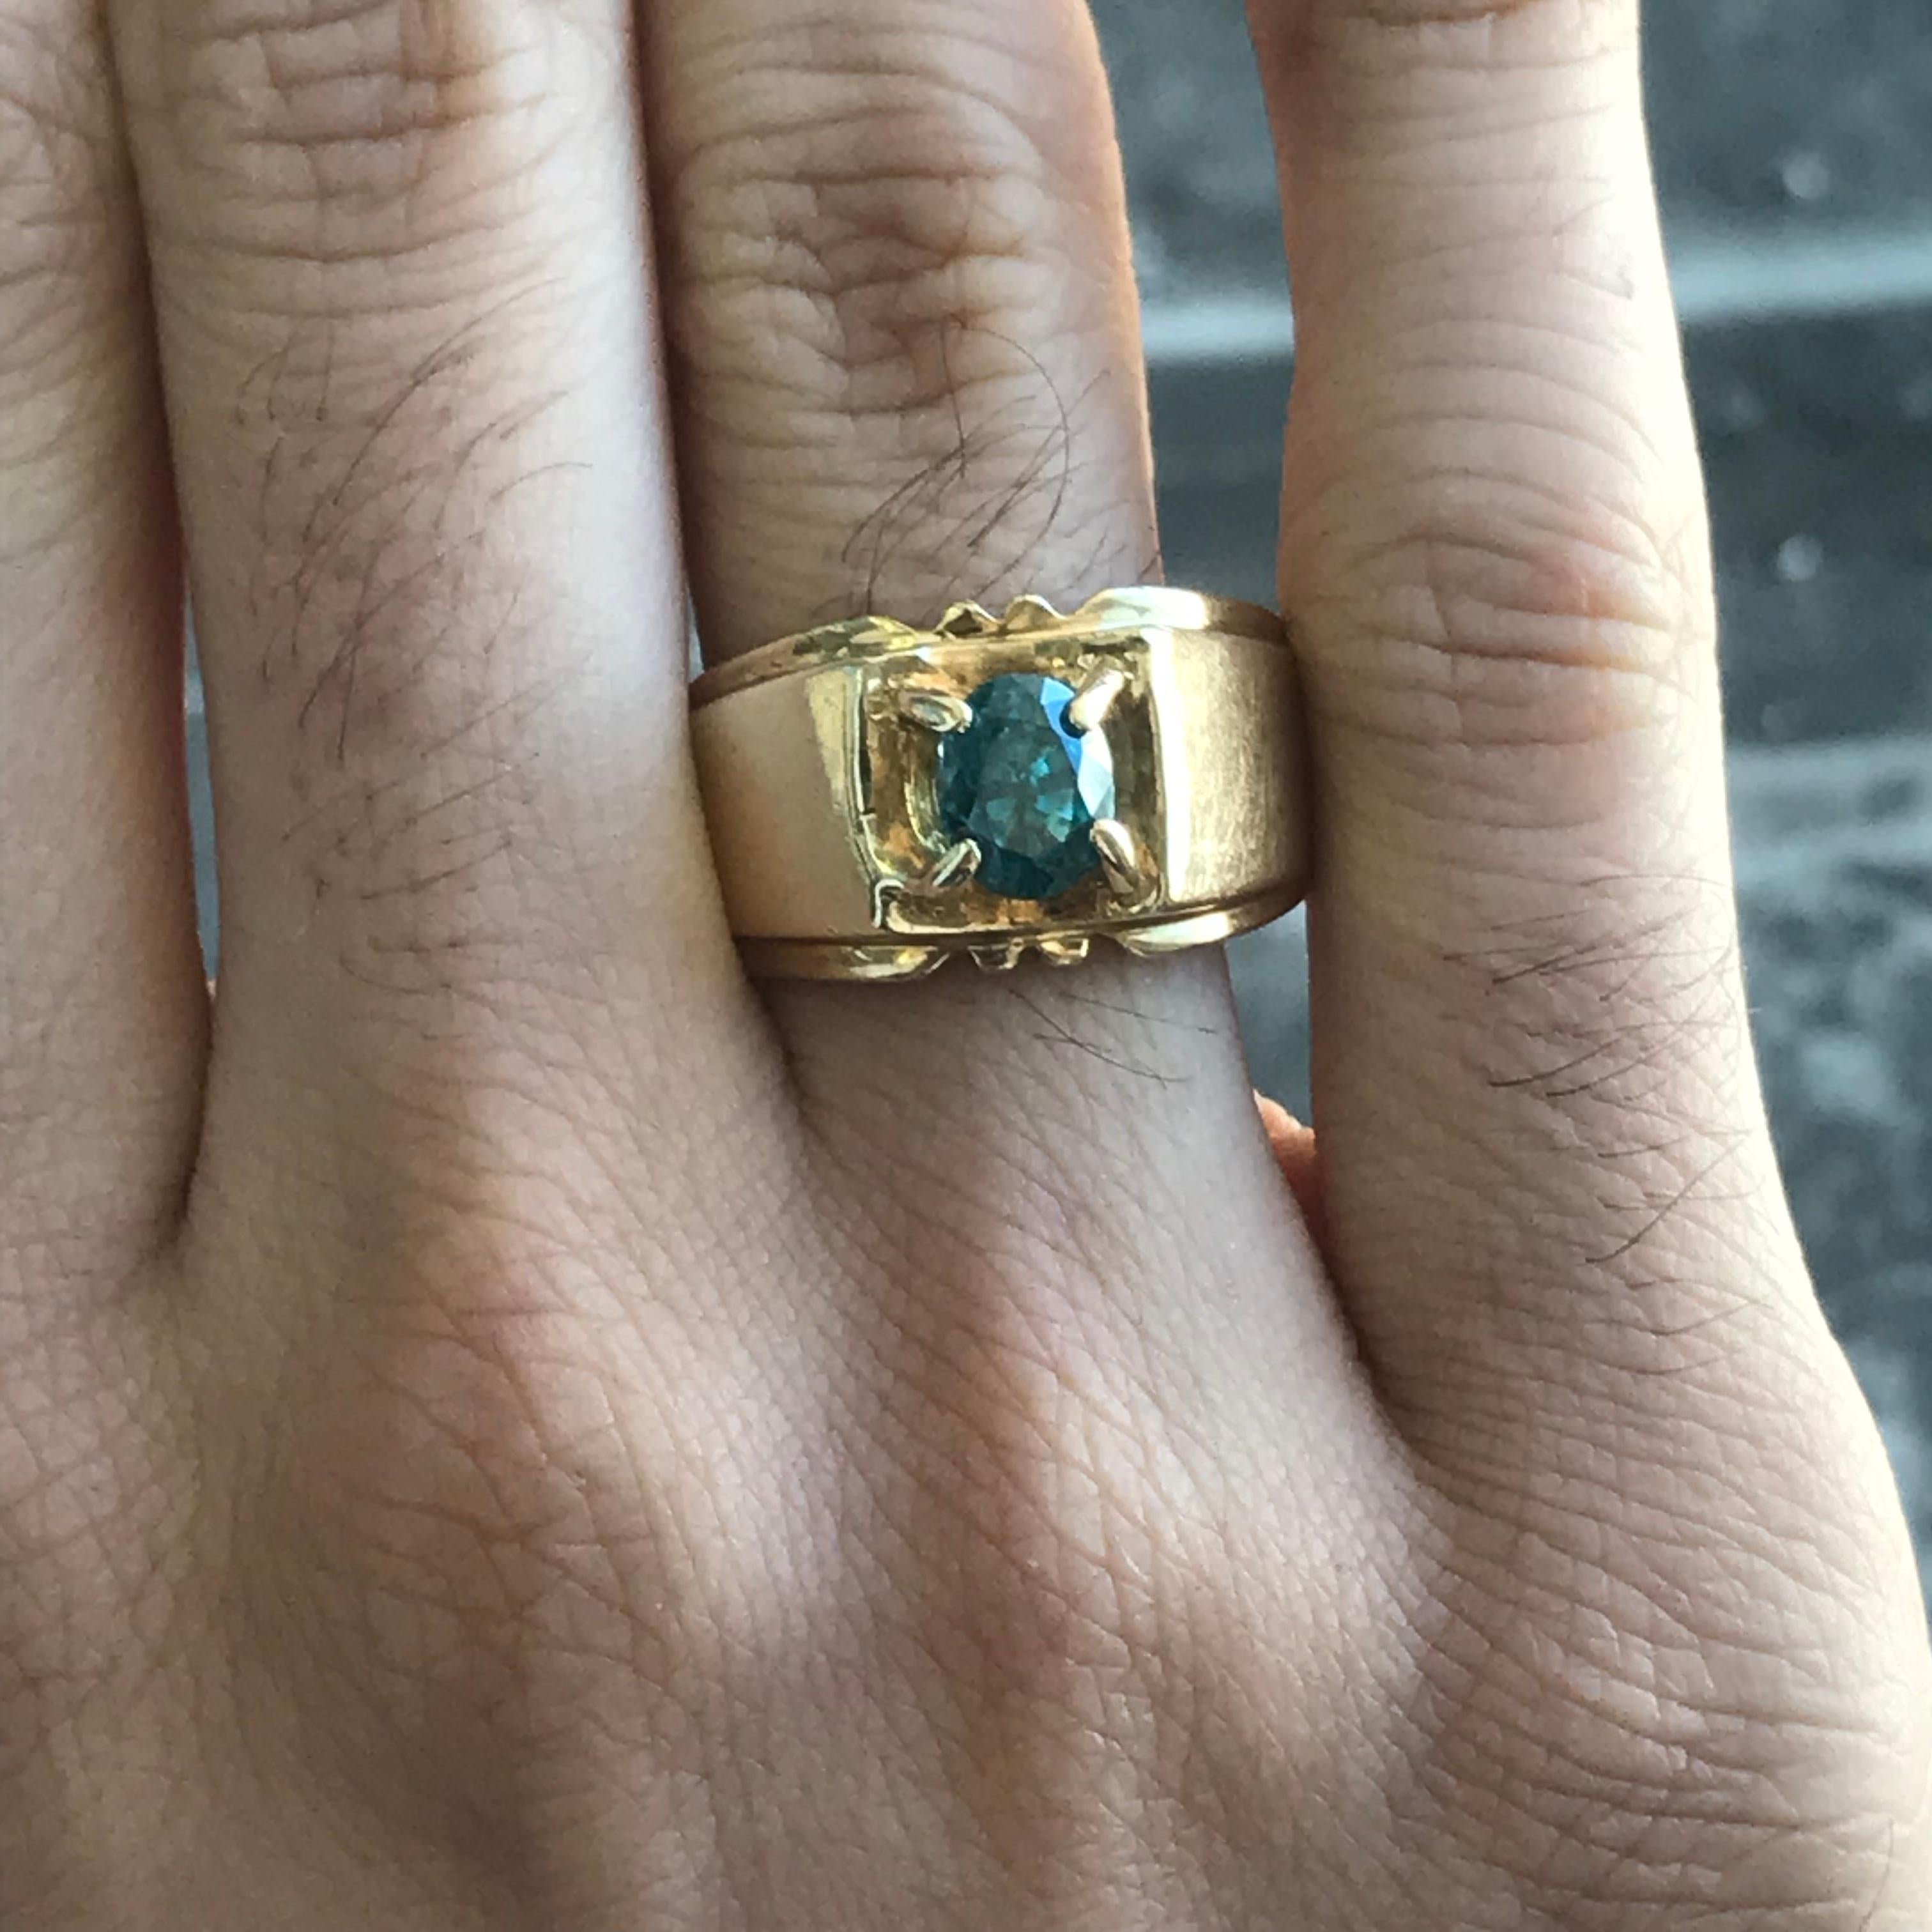 2 Carat Approximate Oval Blue Zircon in 14 Karat Gold Men's Ring, Ben Dannie In Excellent Condition For Sale In West Hollywood, CA